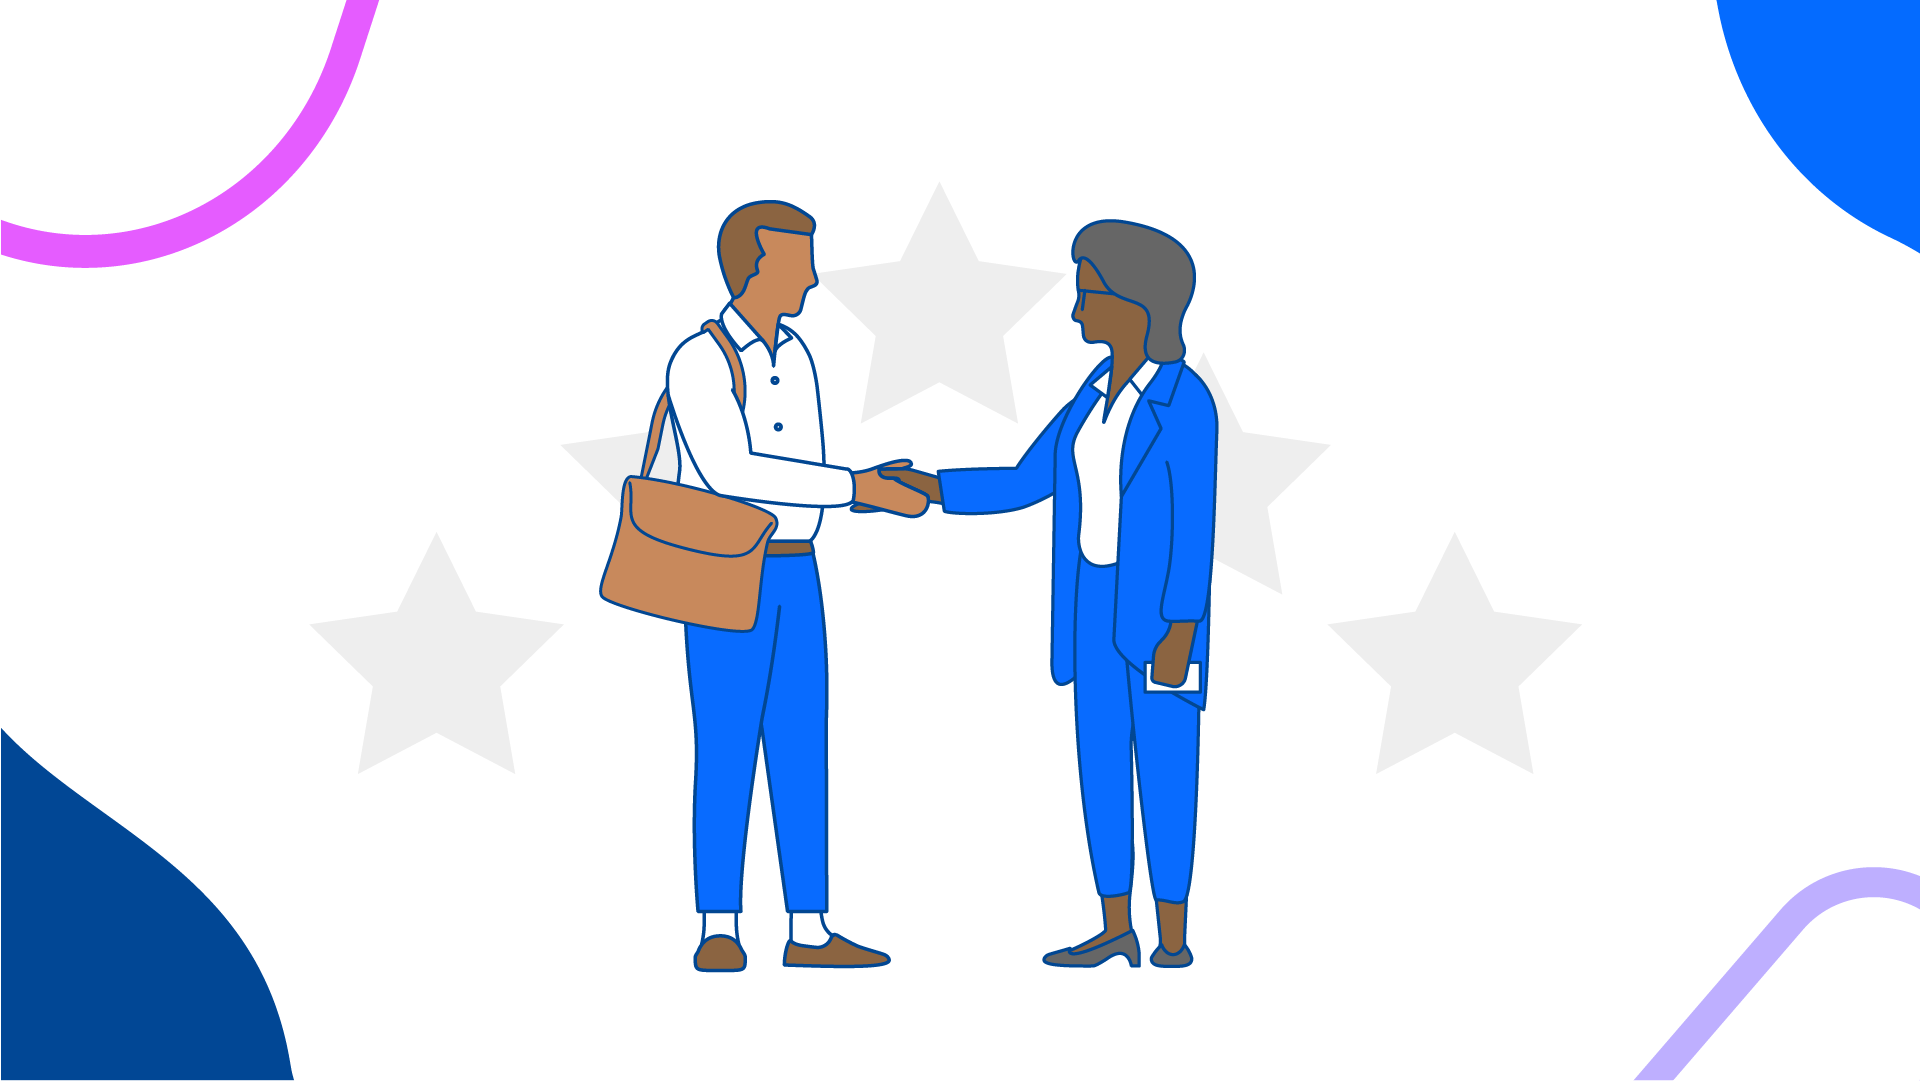 [Blog hero] Improve candidate experience